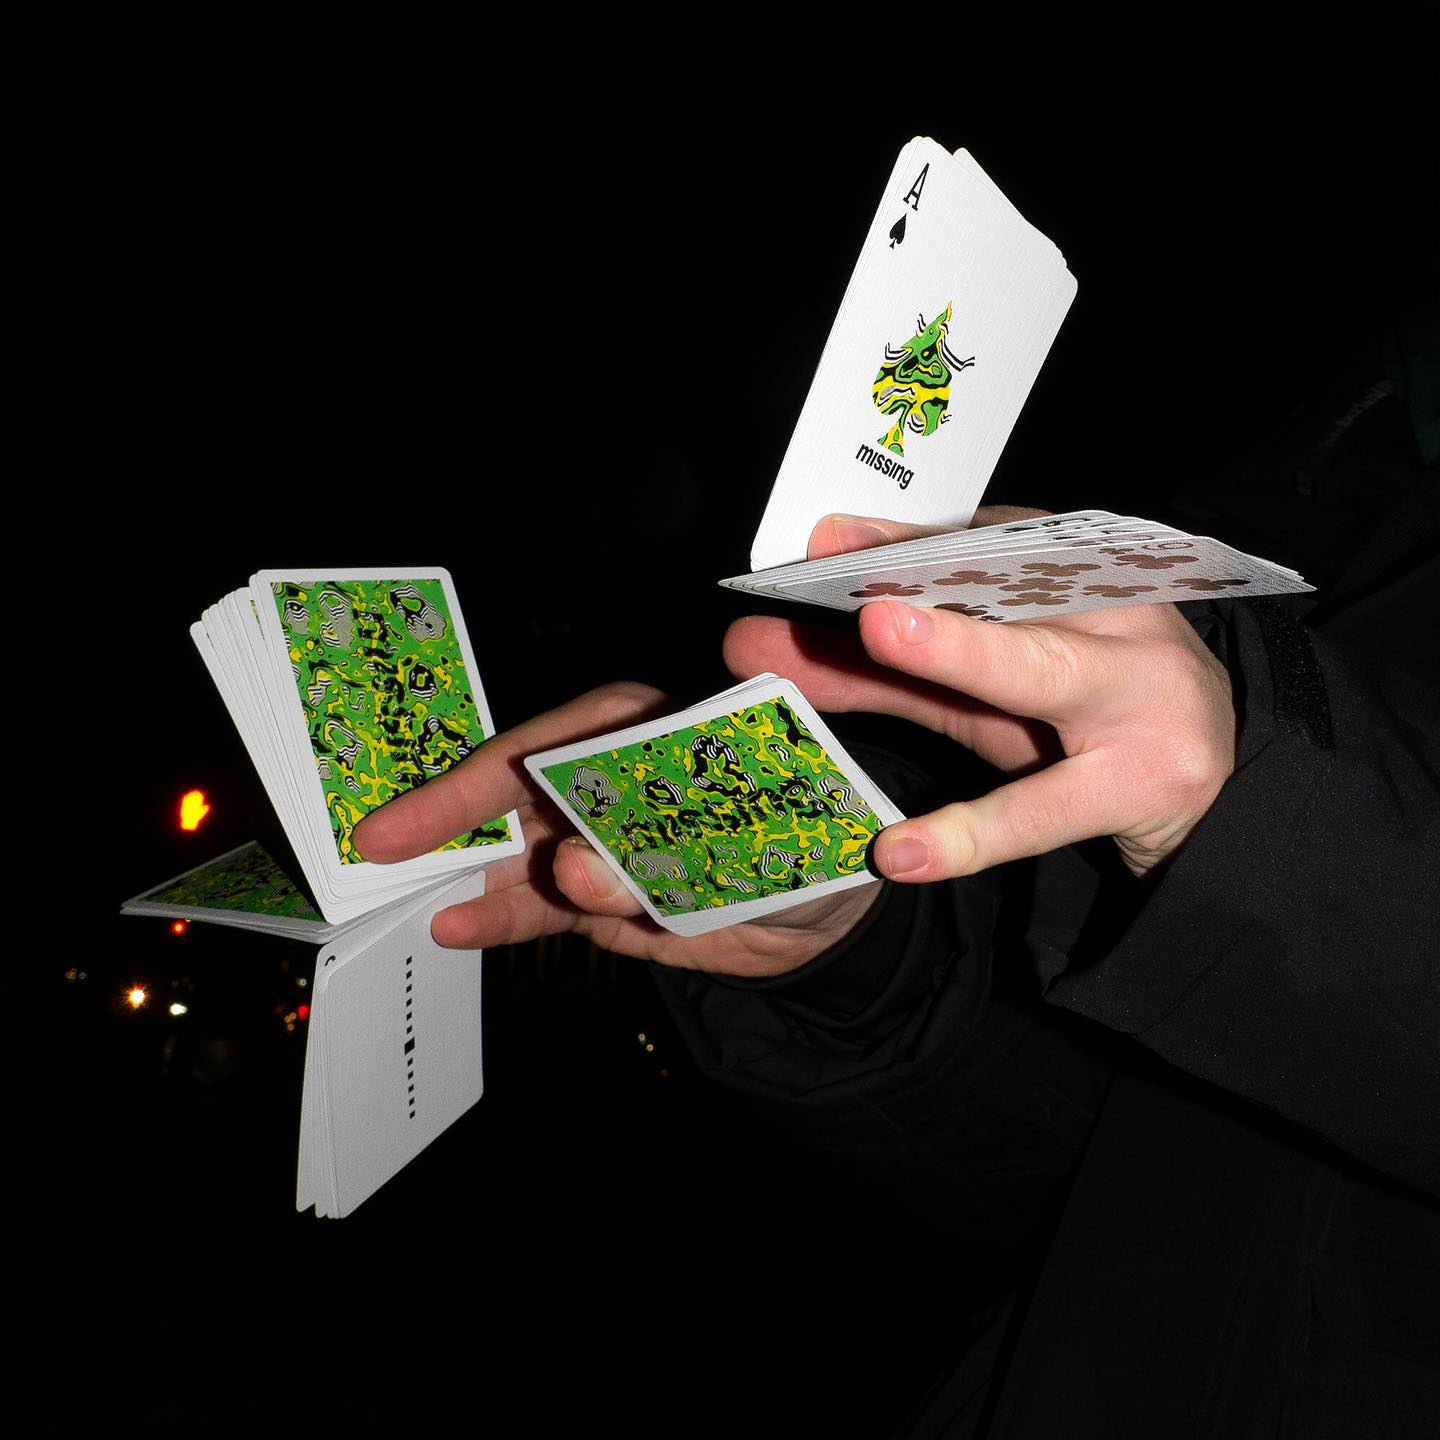 For Cardistry